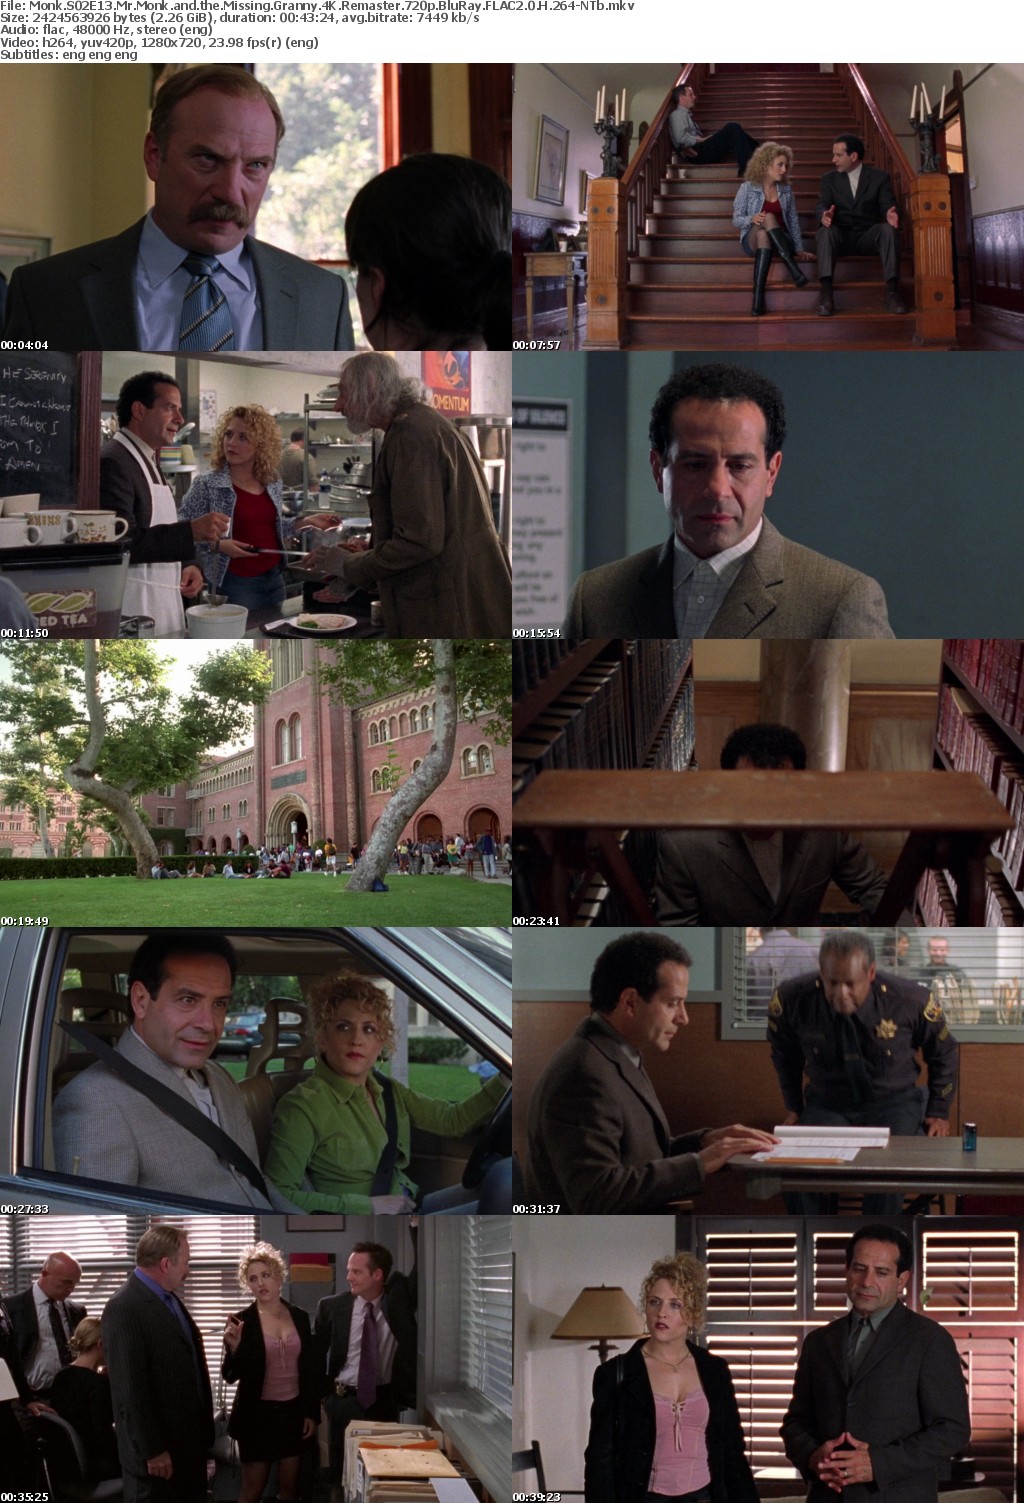 Monk S02E13 Mr Monk and the Missing Granny 4K Remaster 720p BluRay FLAC2 0 H 264-NTb